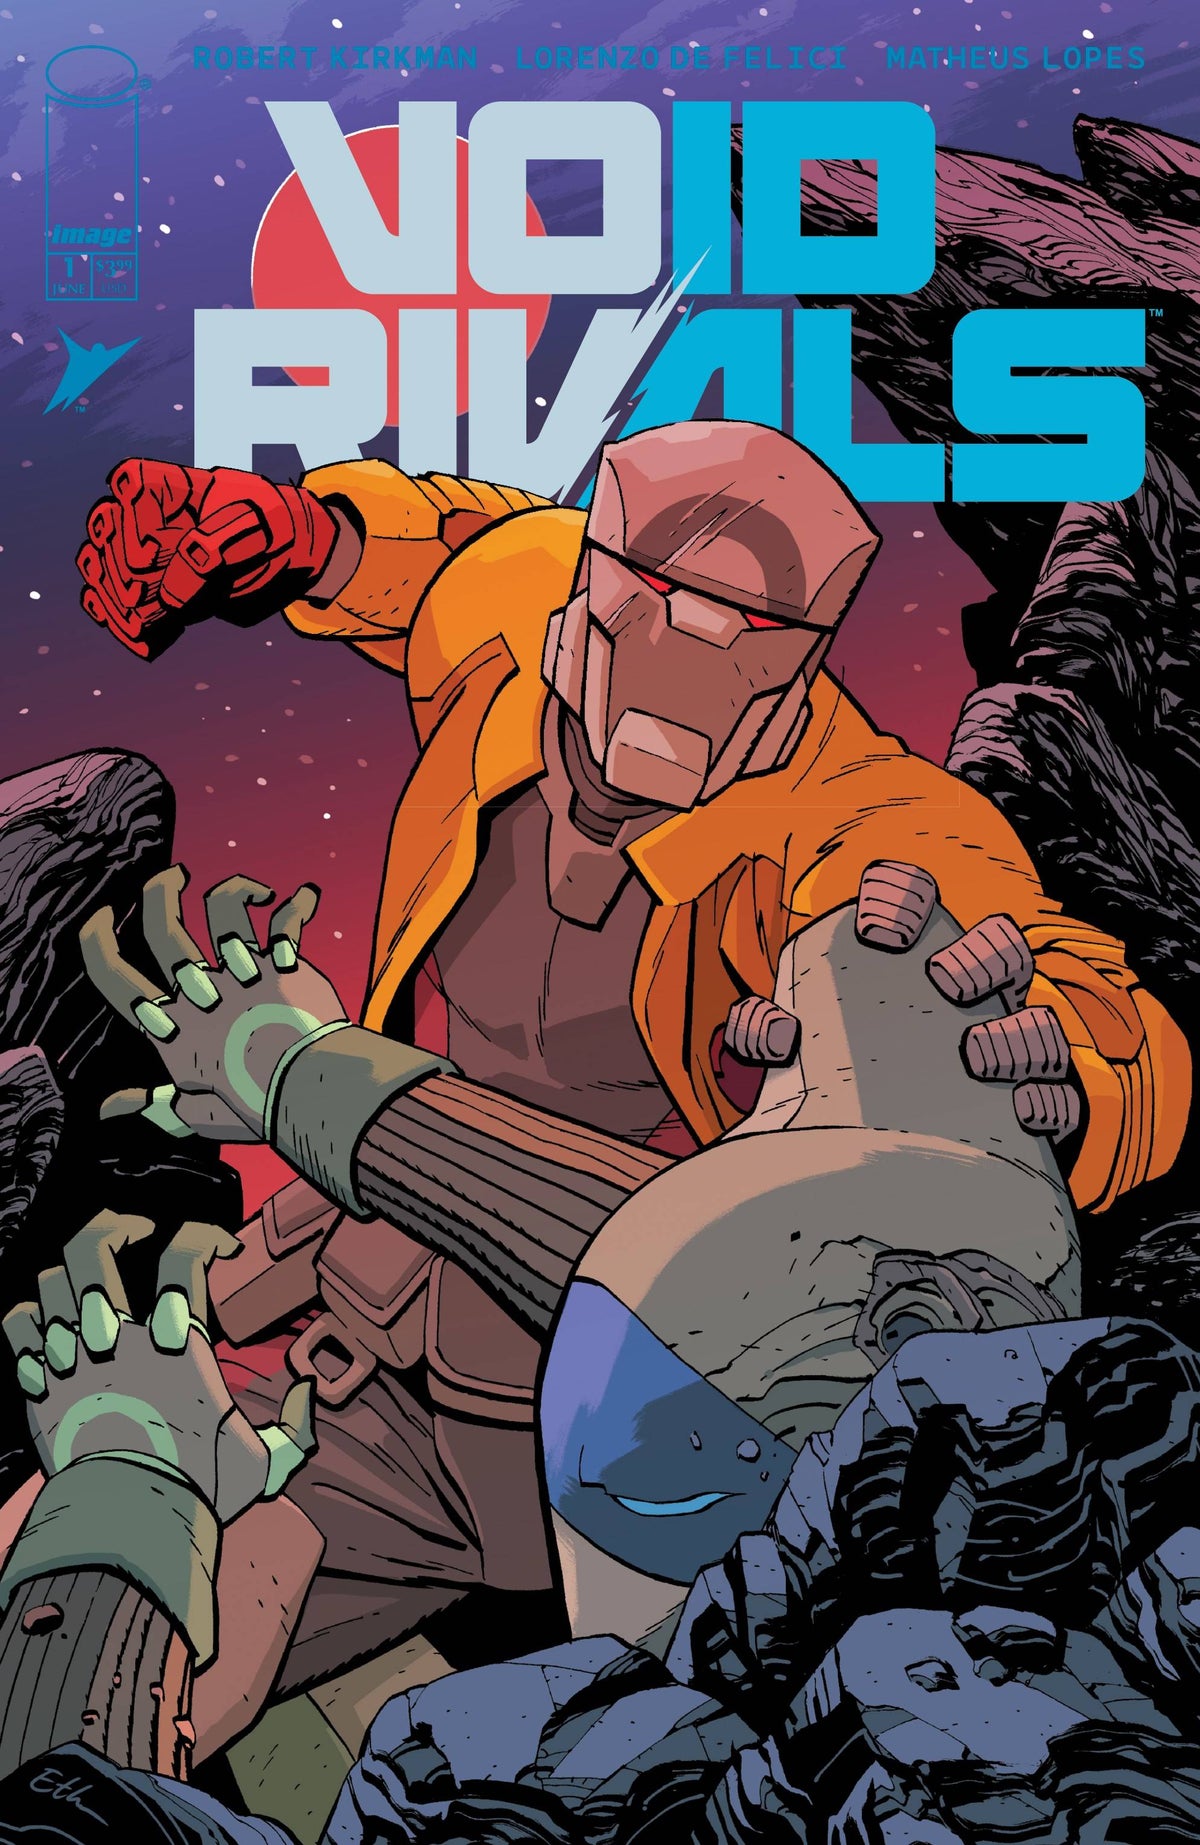 Void Rivals #1 Cvr B Young - State of Comics